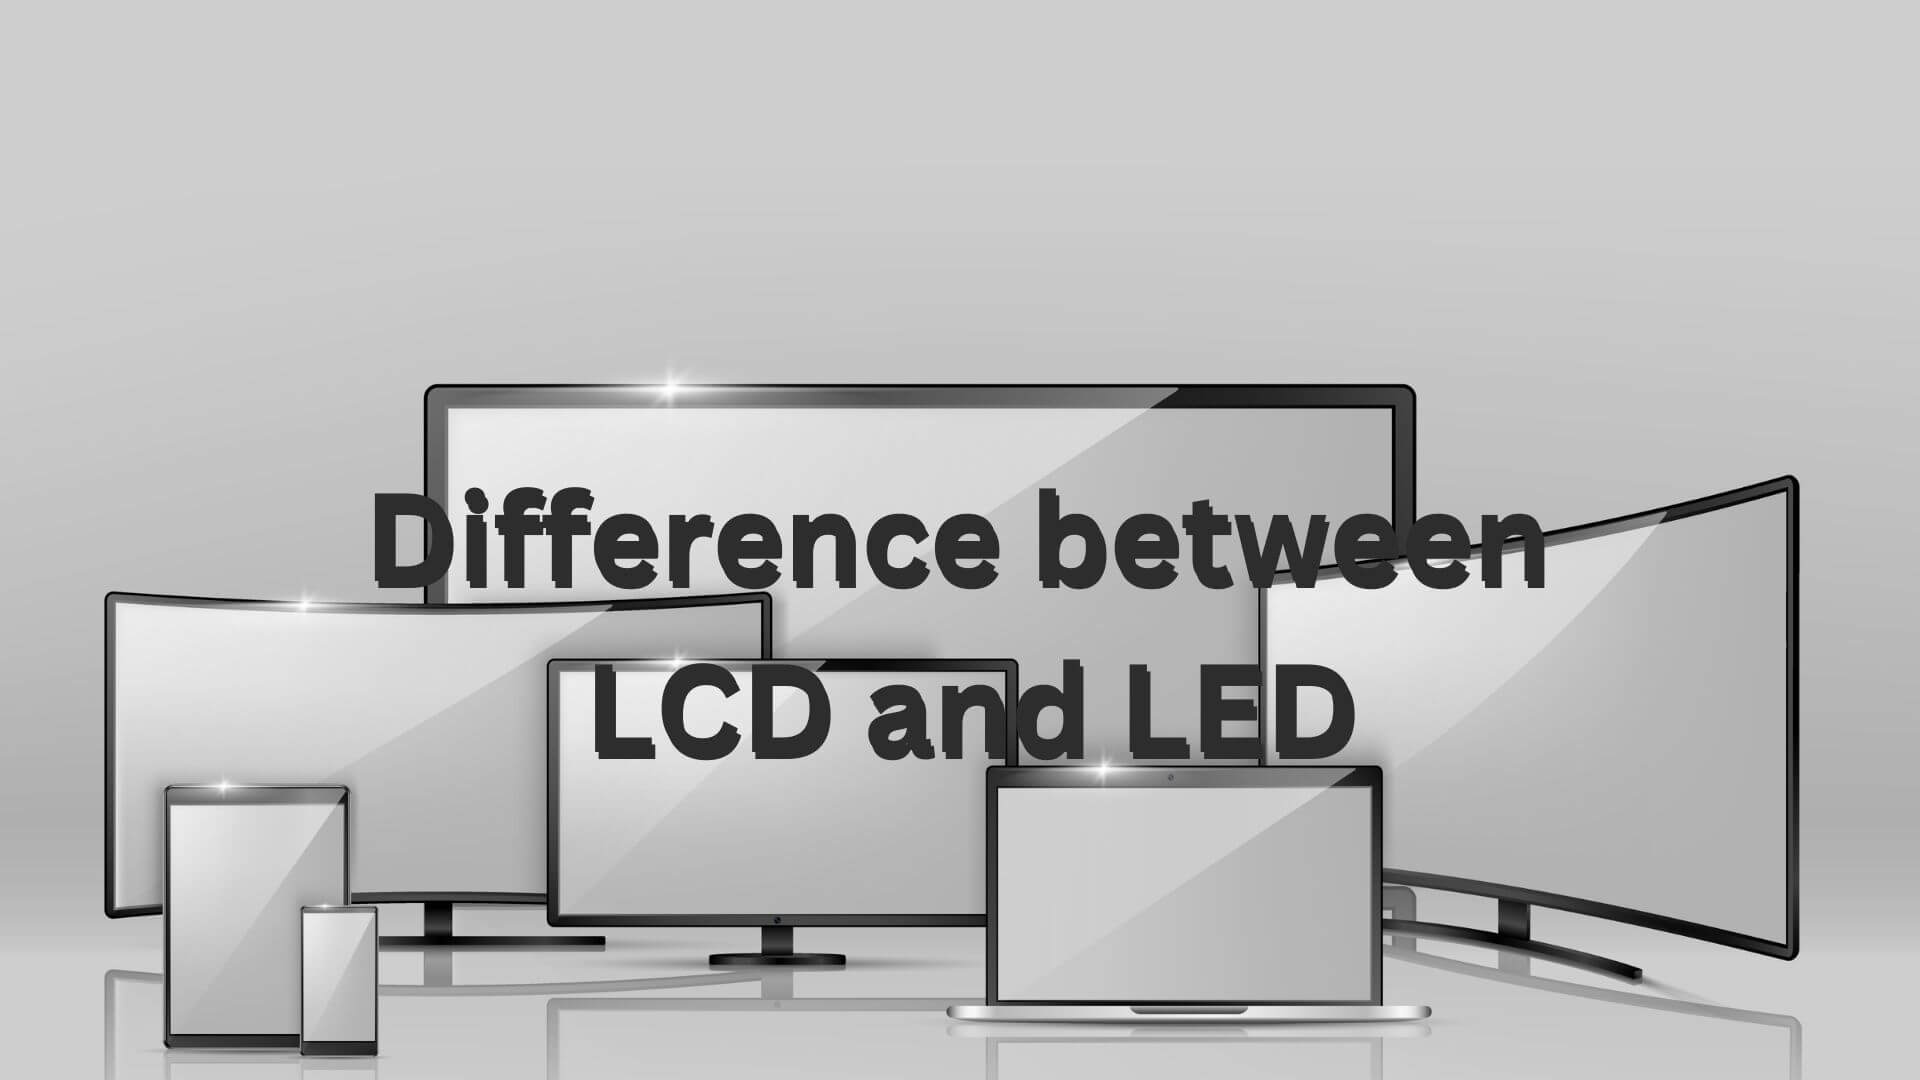 Difference between LCD and LED